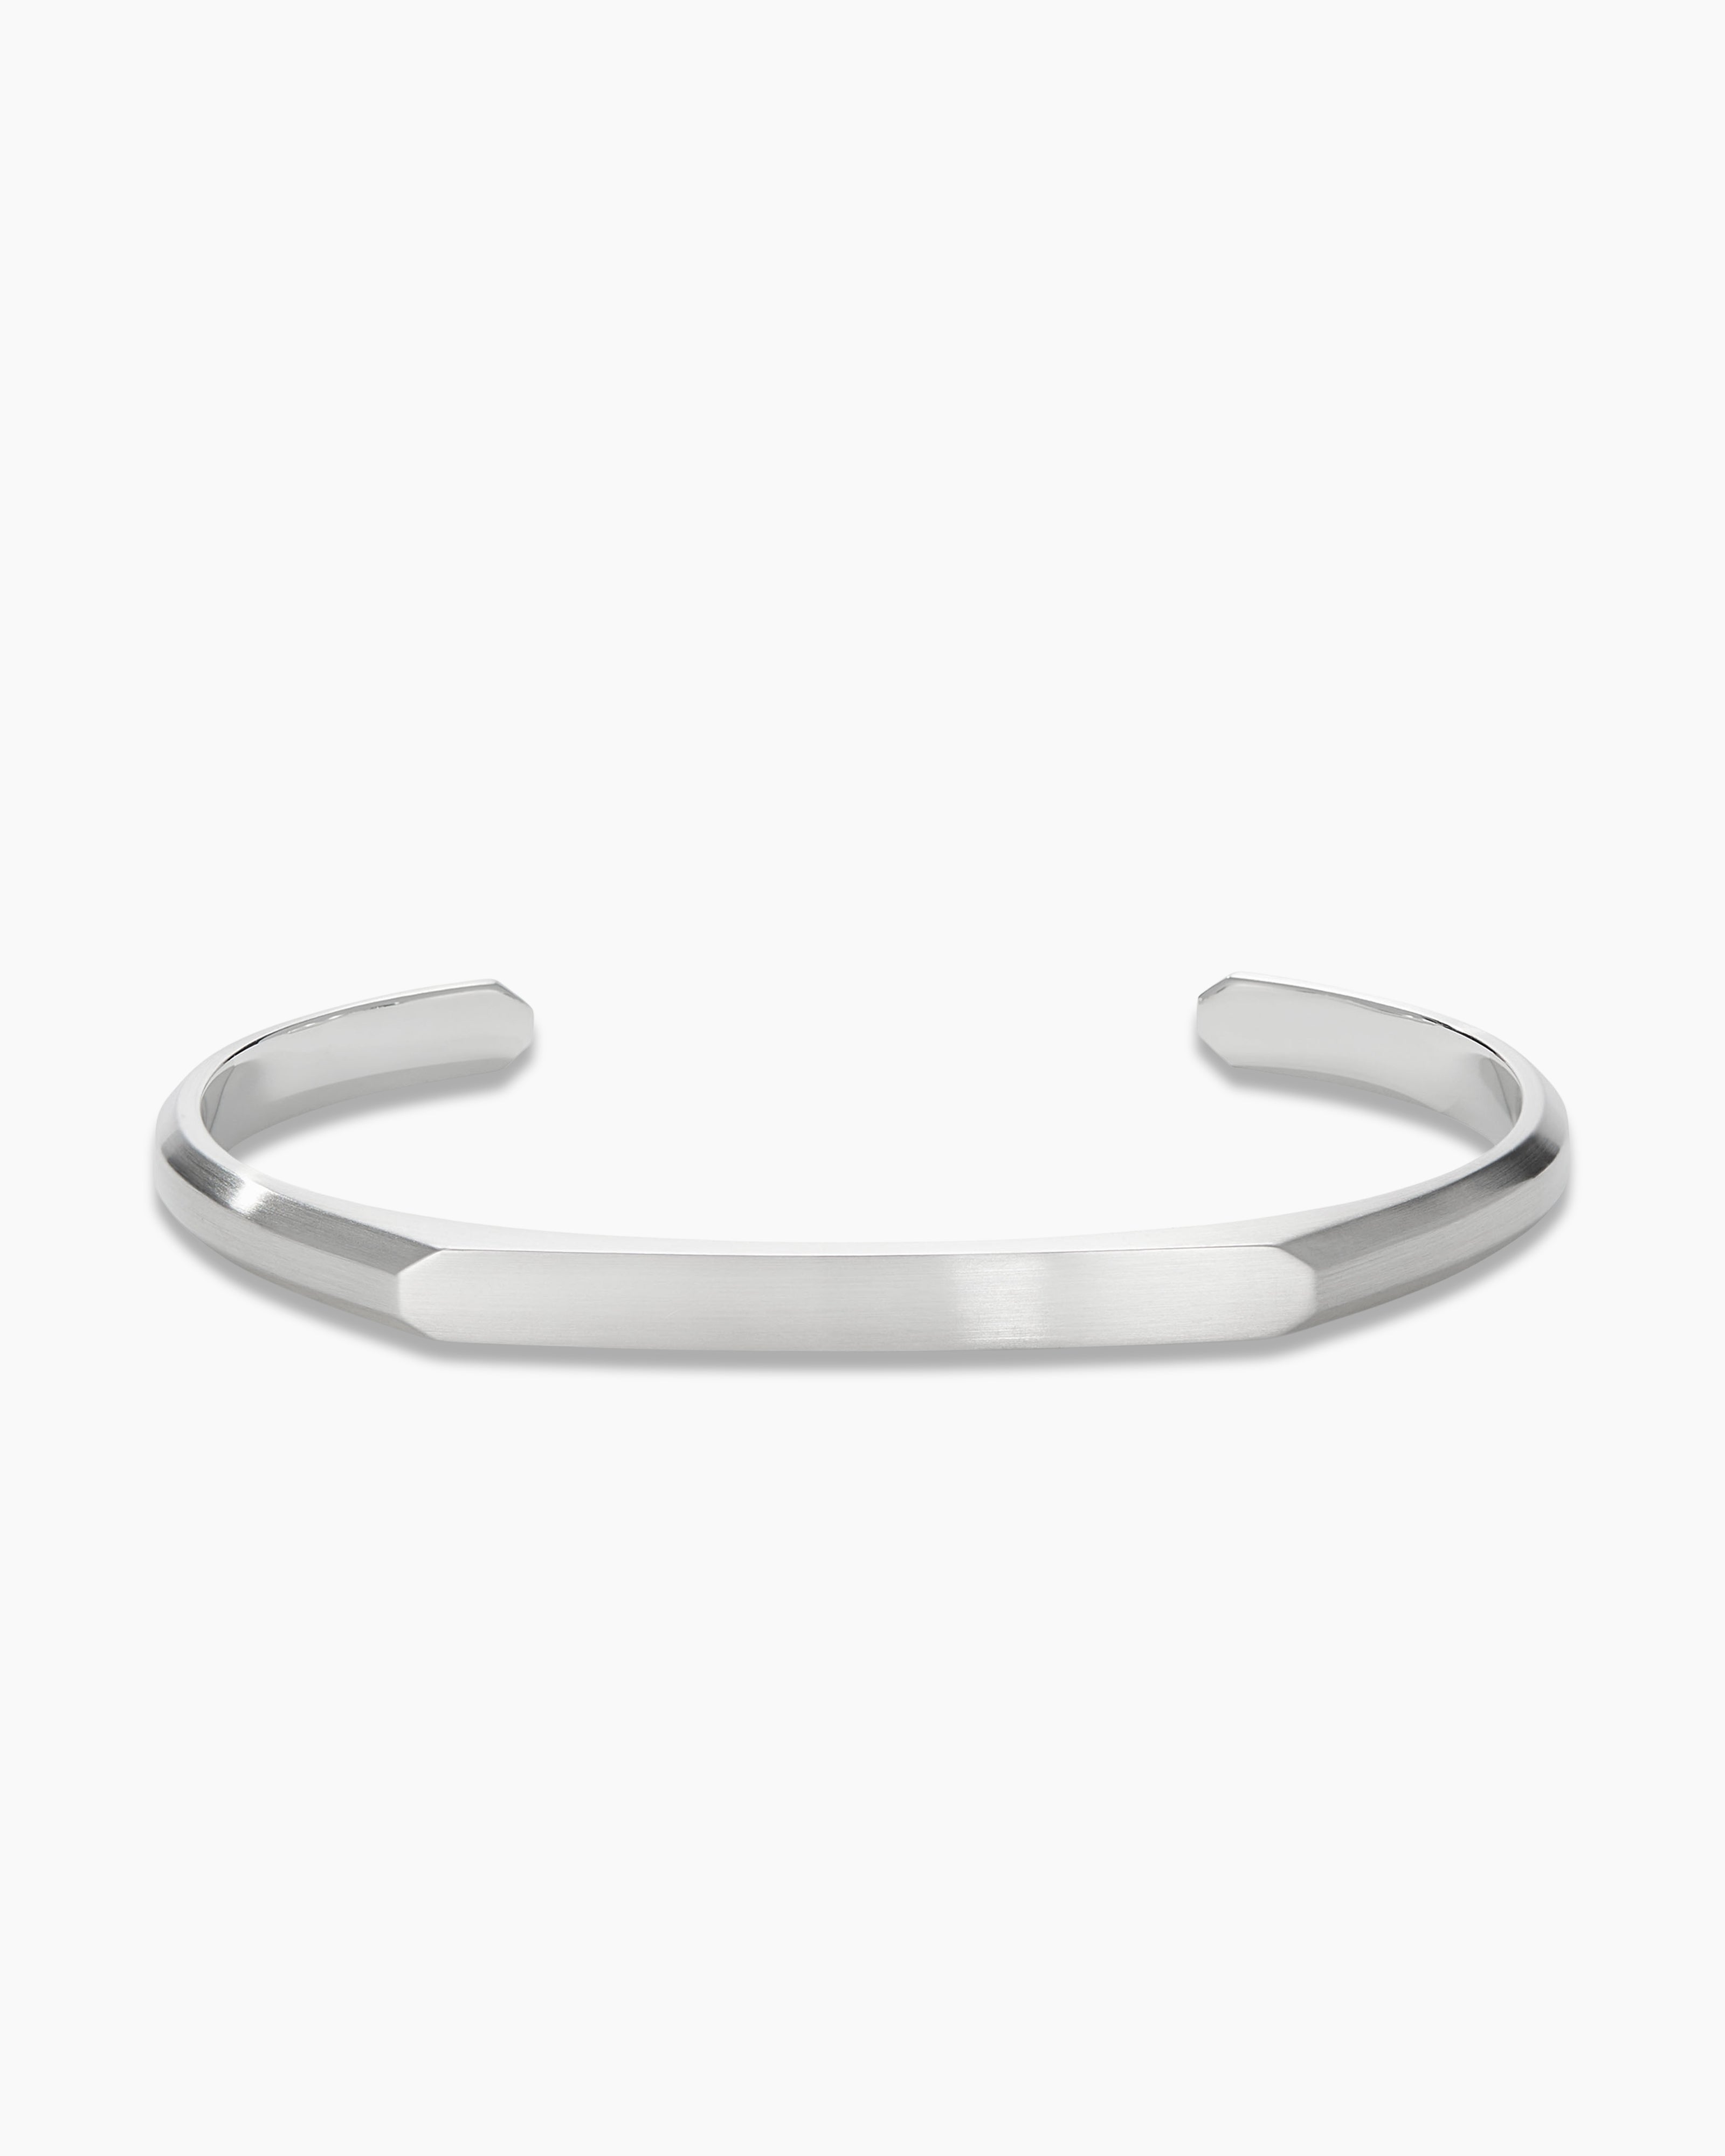 Handmade Thai Silver Twisted Woven Wide Open Mens Sterling Silver Bangle  Bracelet For Couples From Rrclothes, $11.49 | DHgate.Com